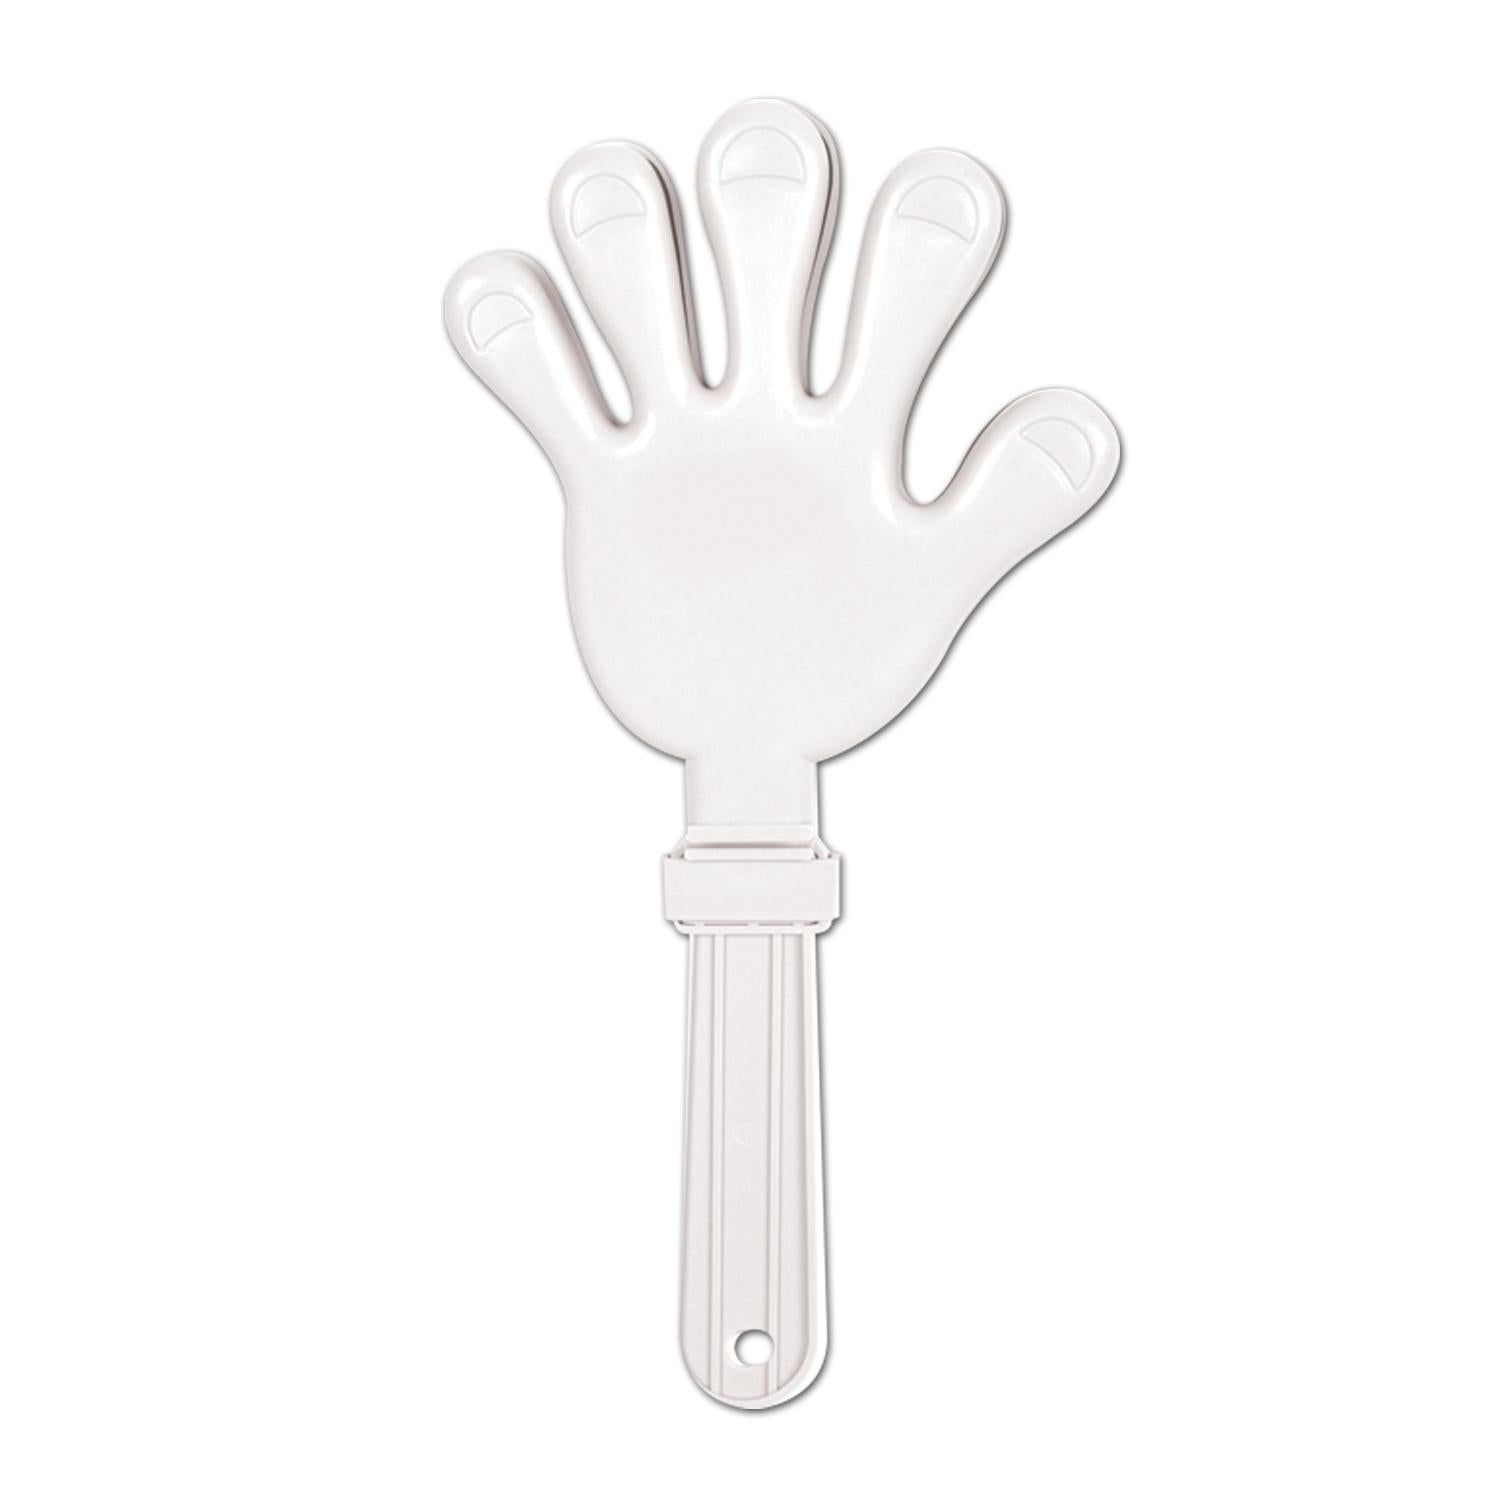 Beistle Giant Hand Party Clapper - white